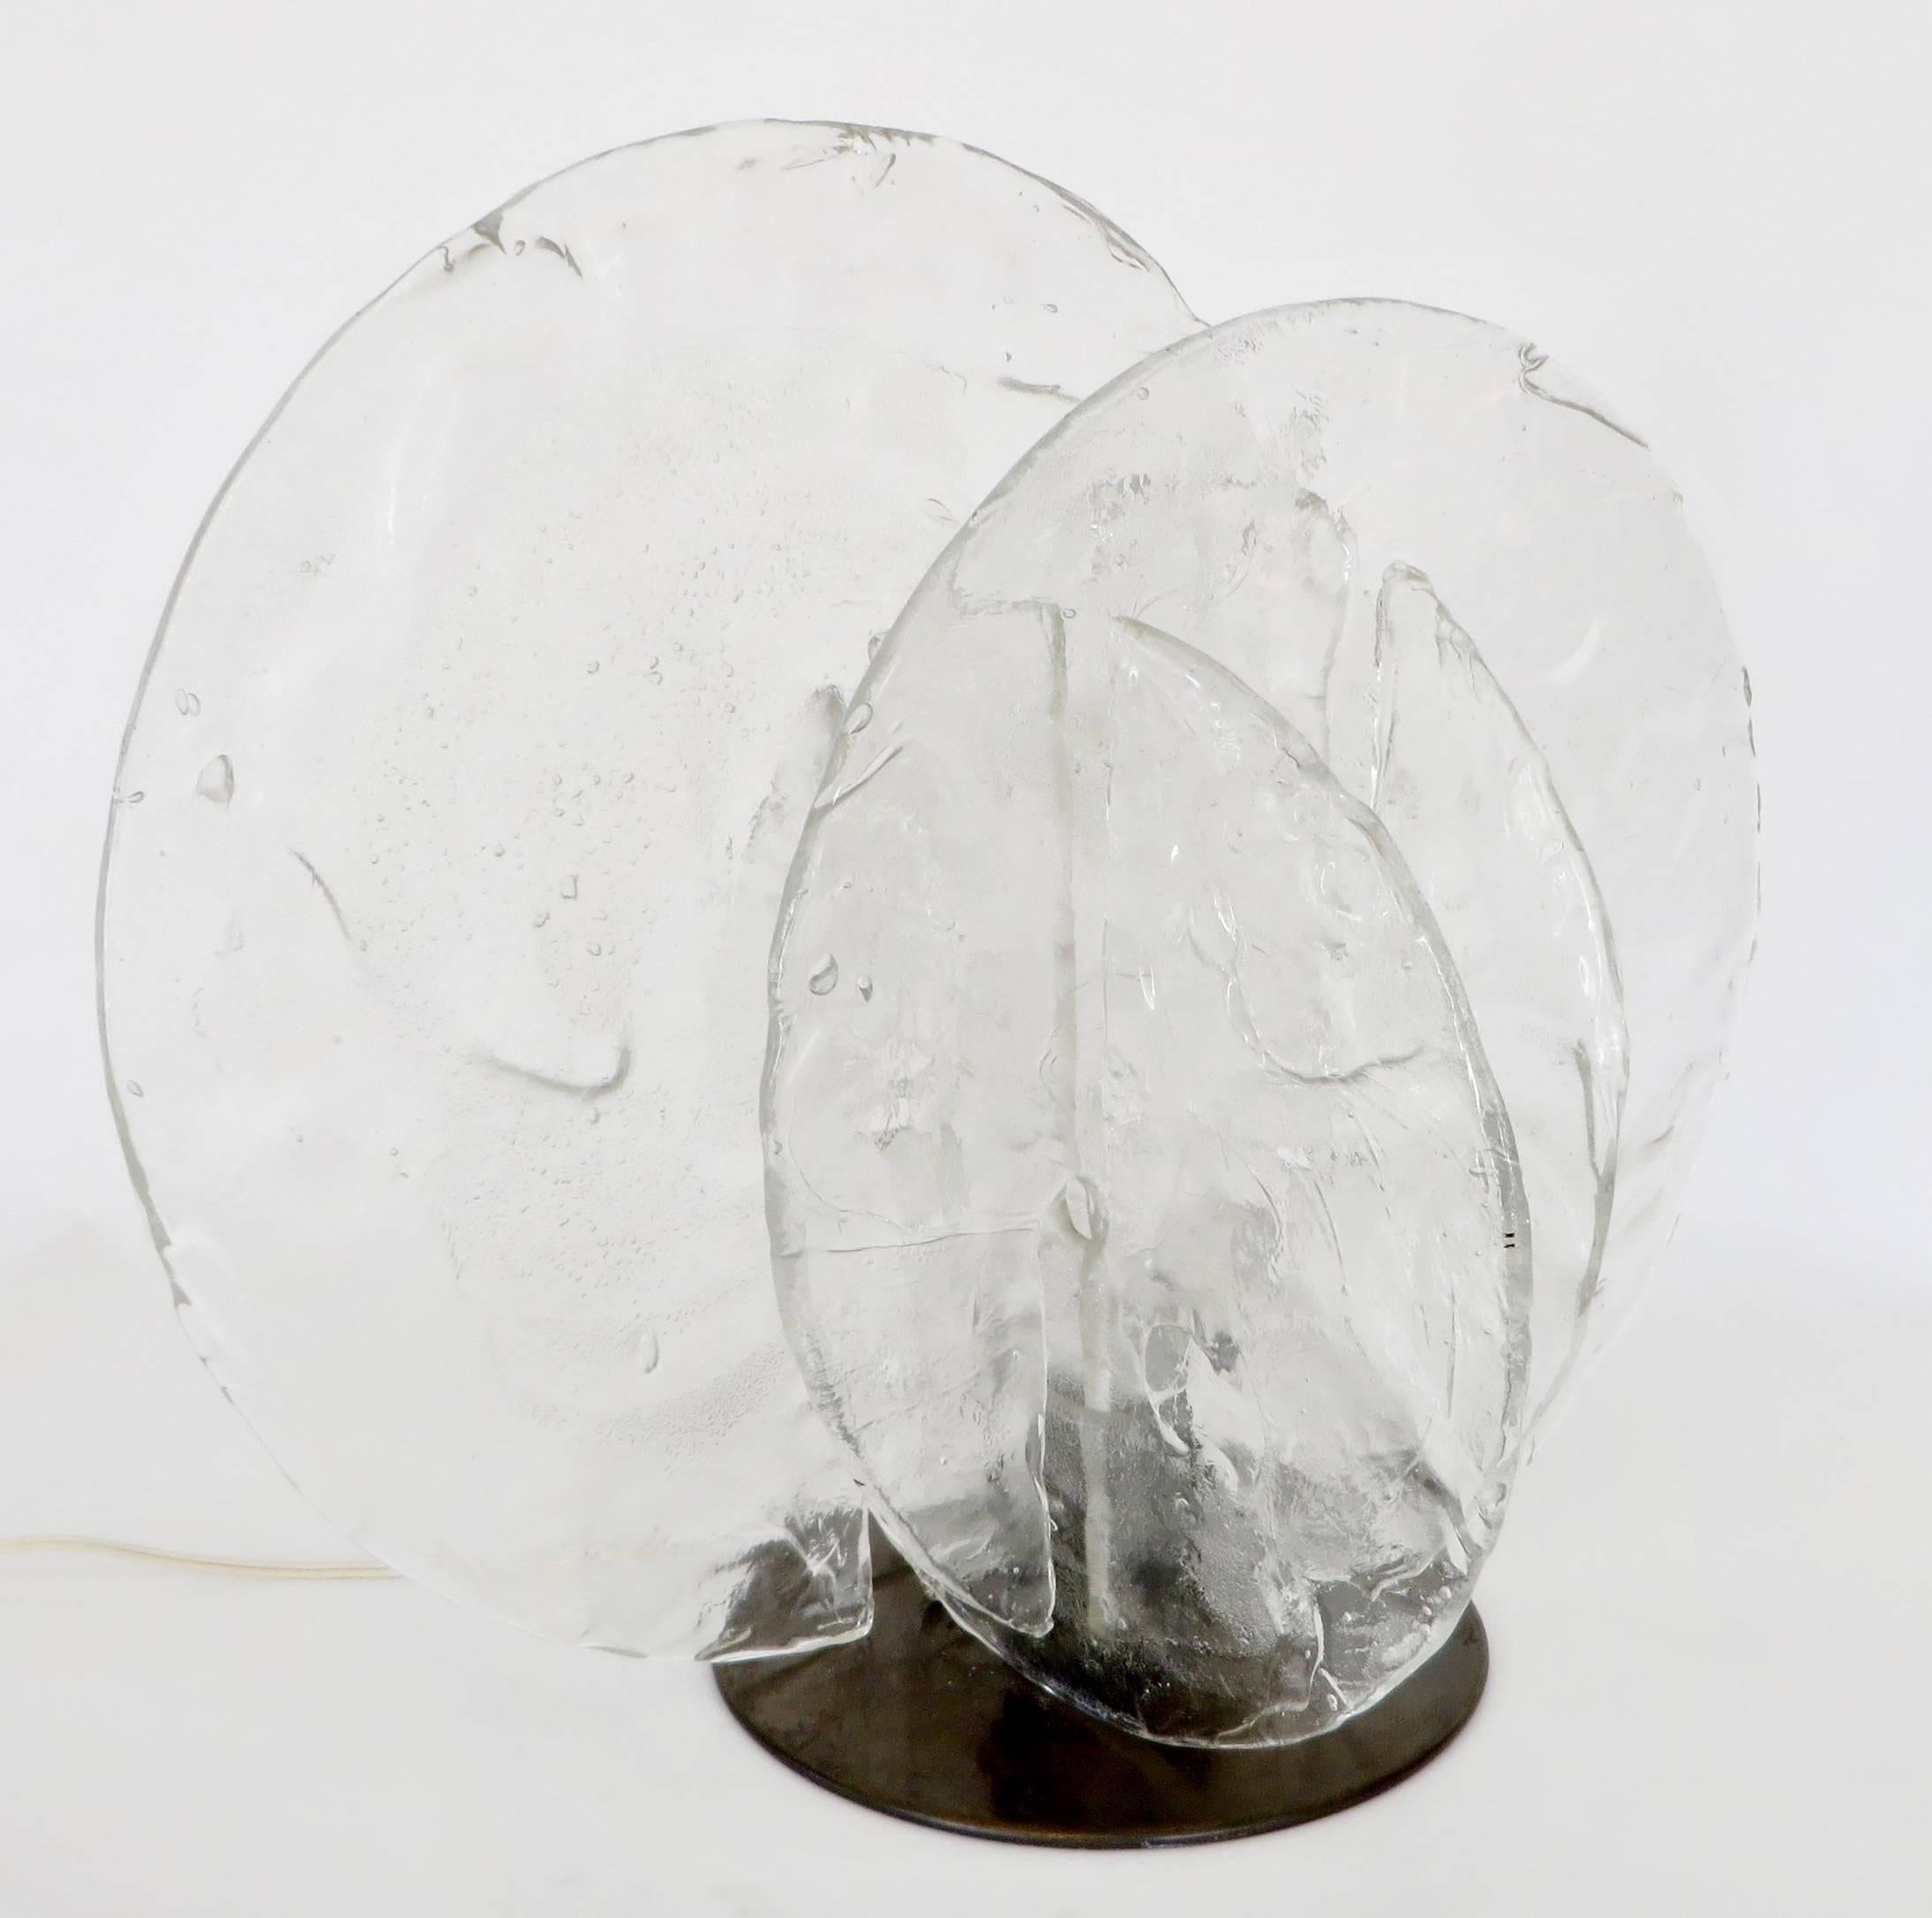 Late 20th Century Italian Sculptural Glass Four-Disc Table Lamp by Carlo Nason for Mazzega